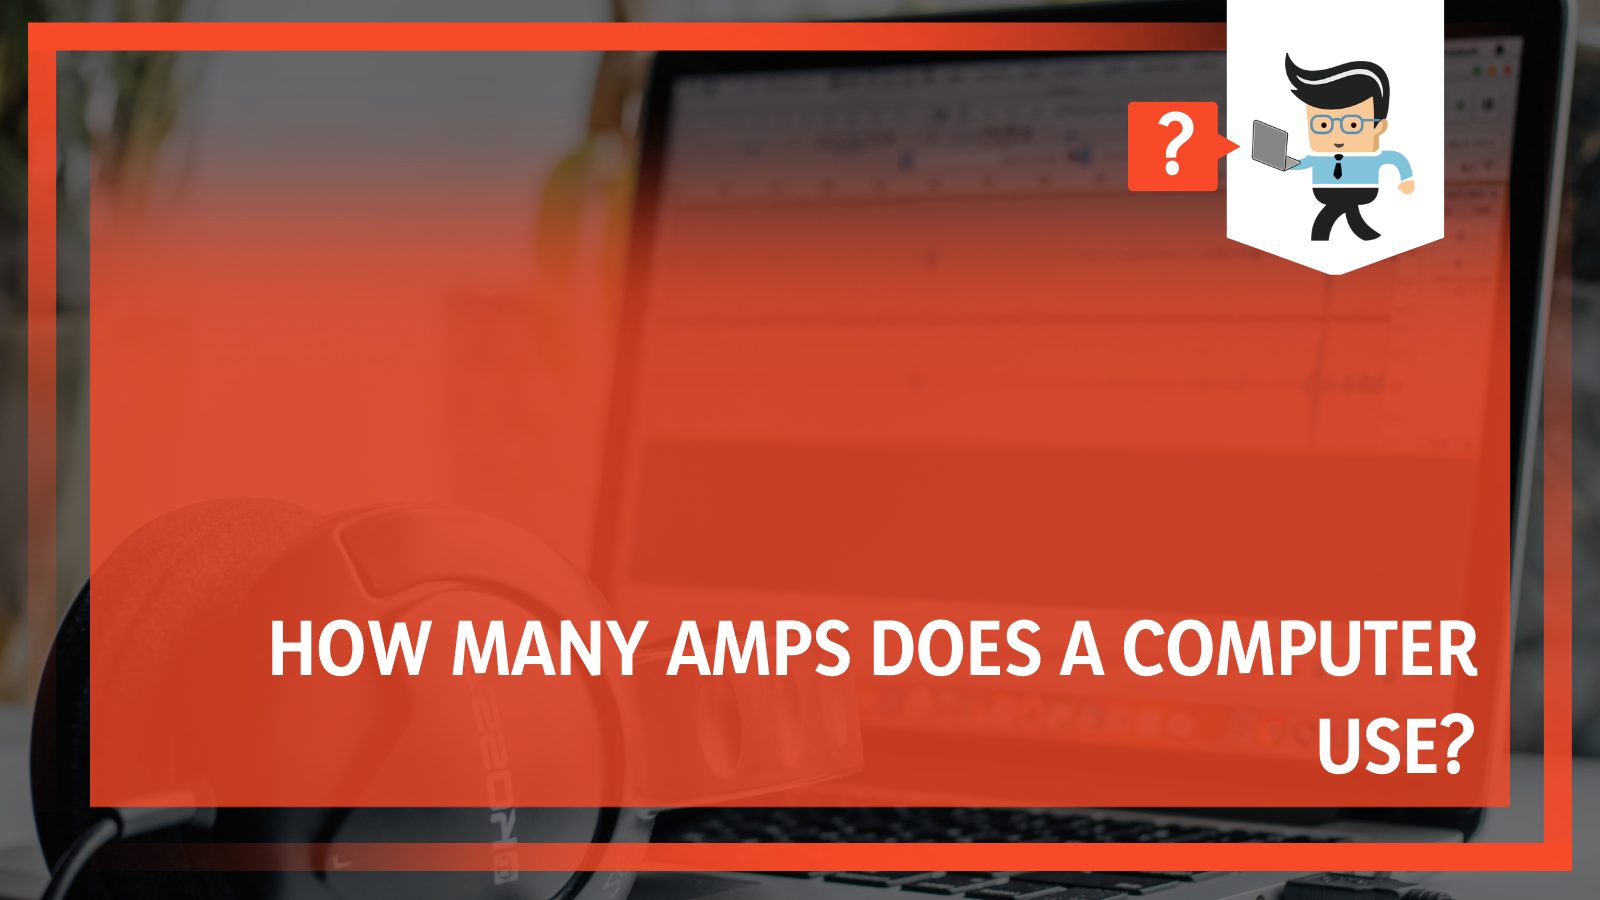 How Many Amps Does a Computer Use